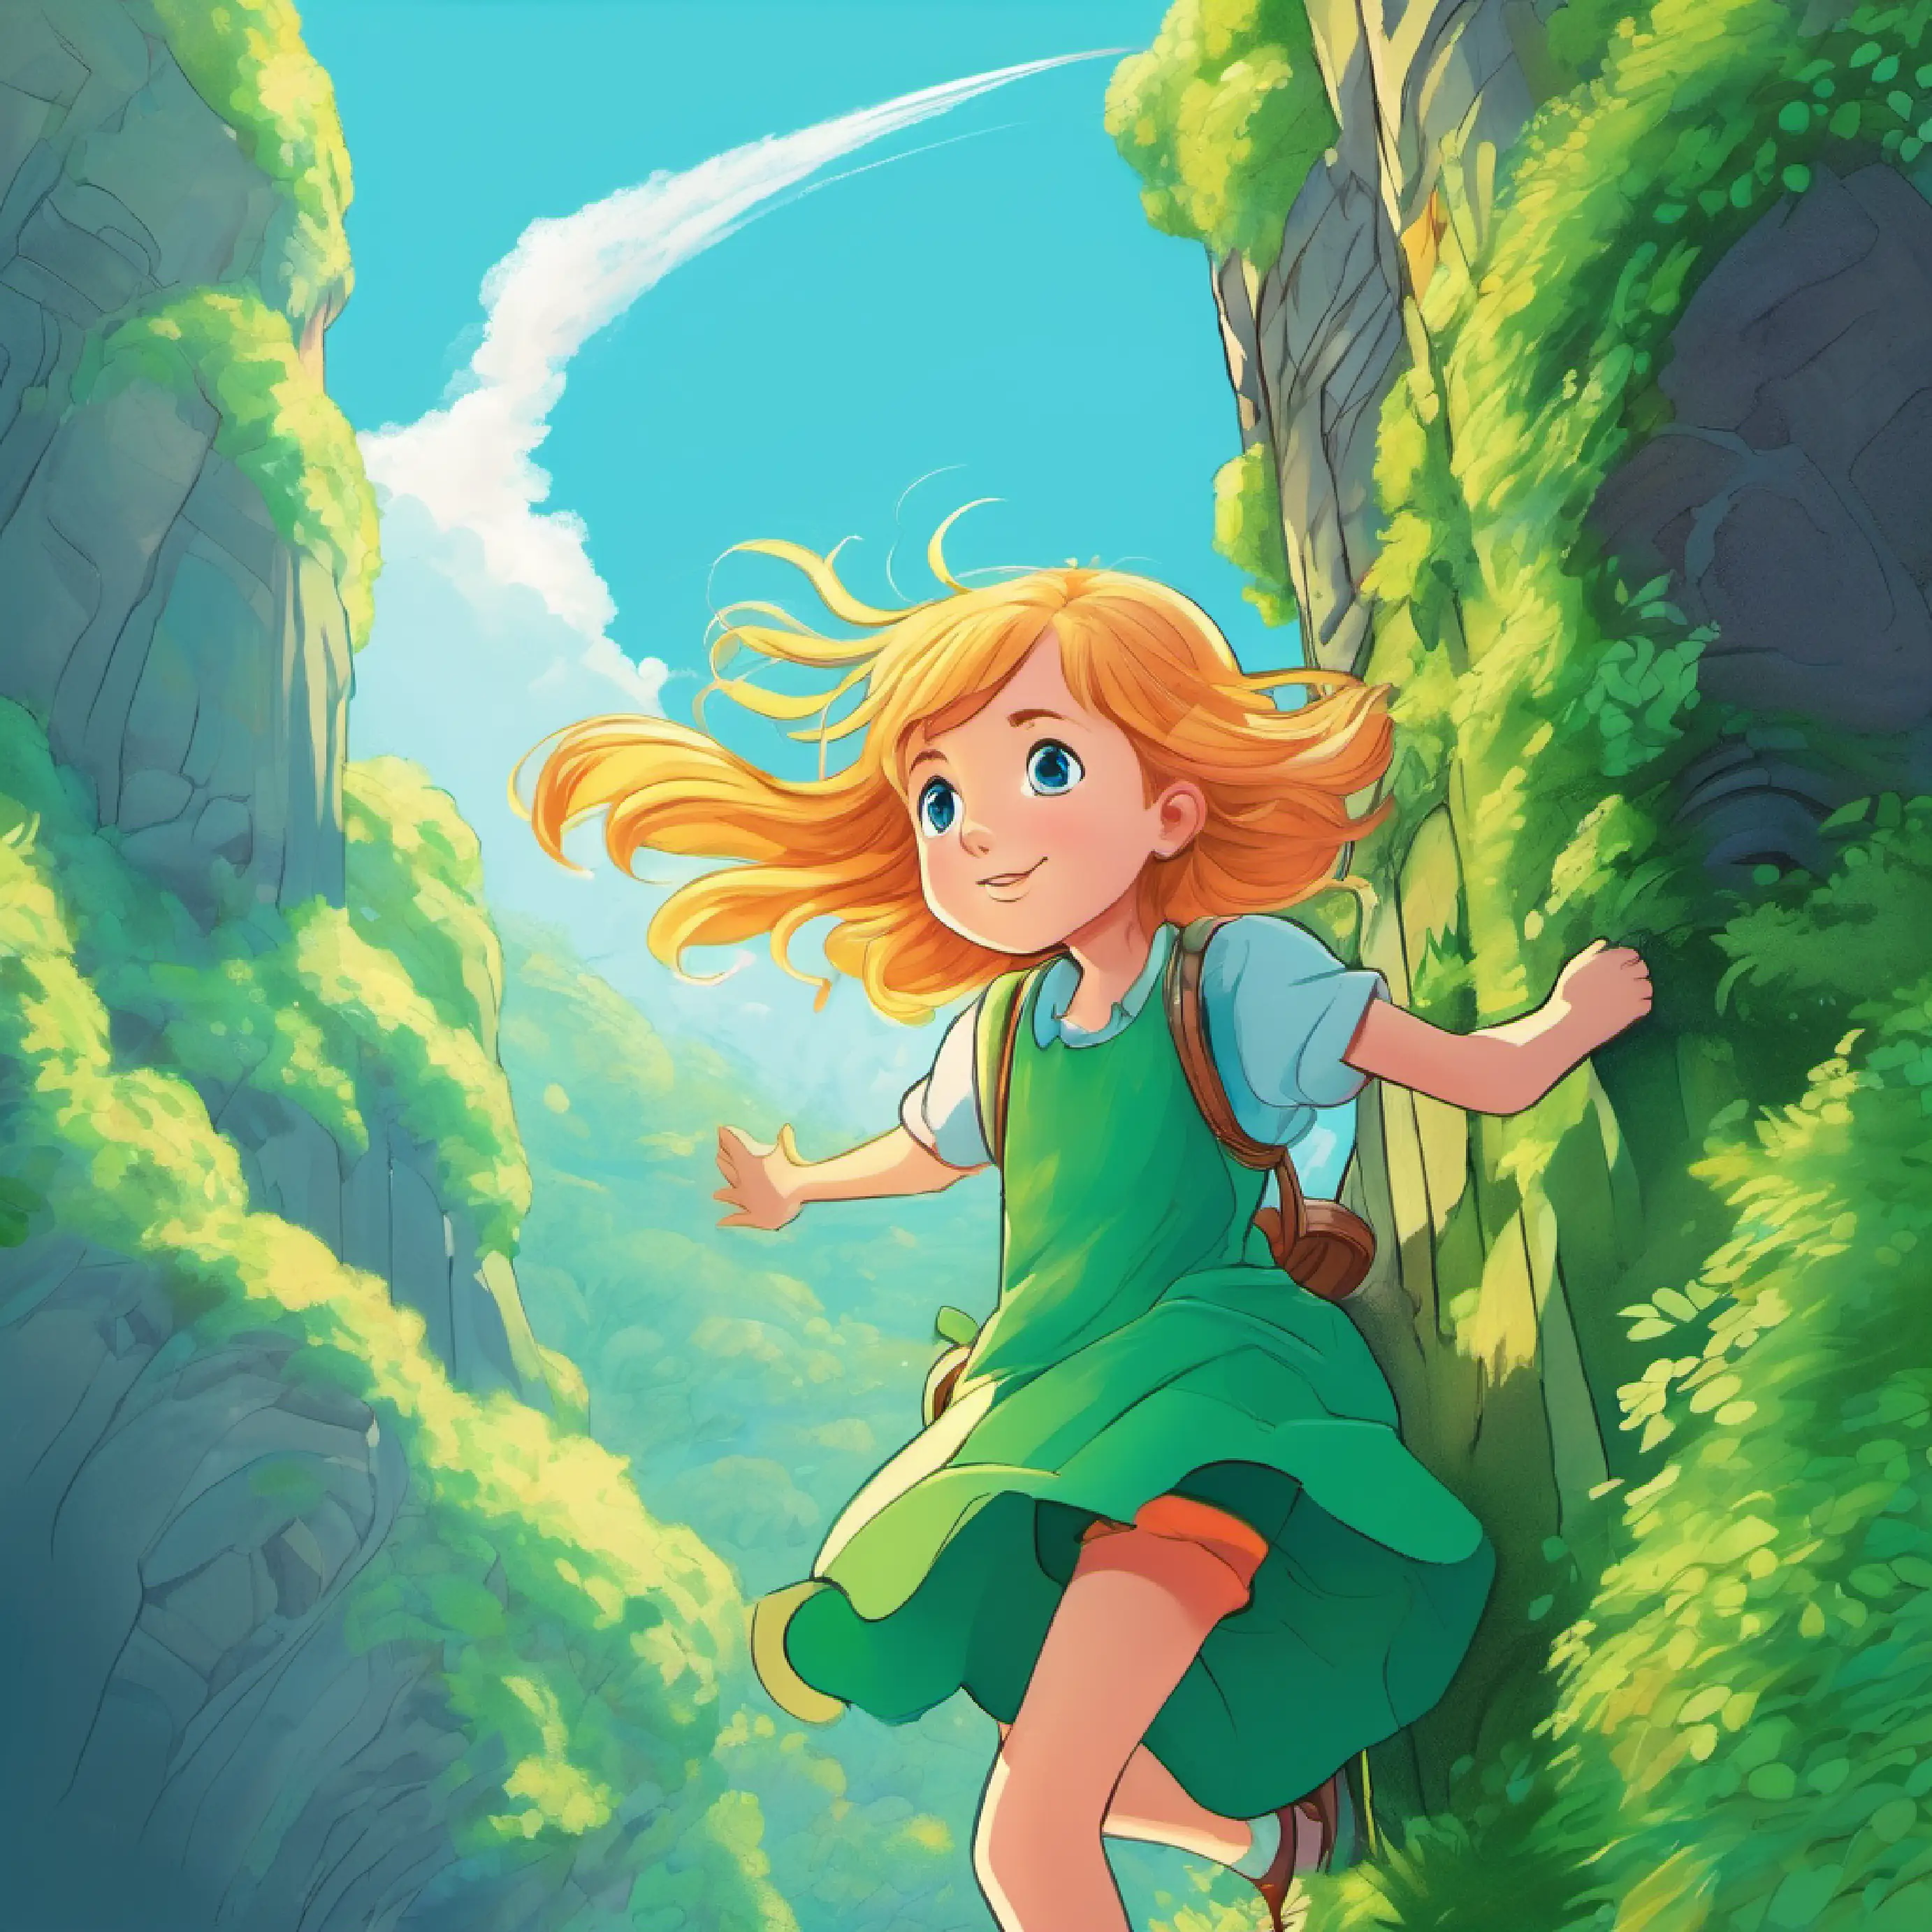 Girl with sunny hair, full of hope, bright blue eyes, wears a green dress climbing higher, feeling supported by an unseen force.